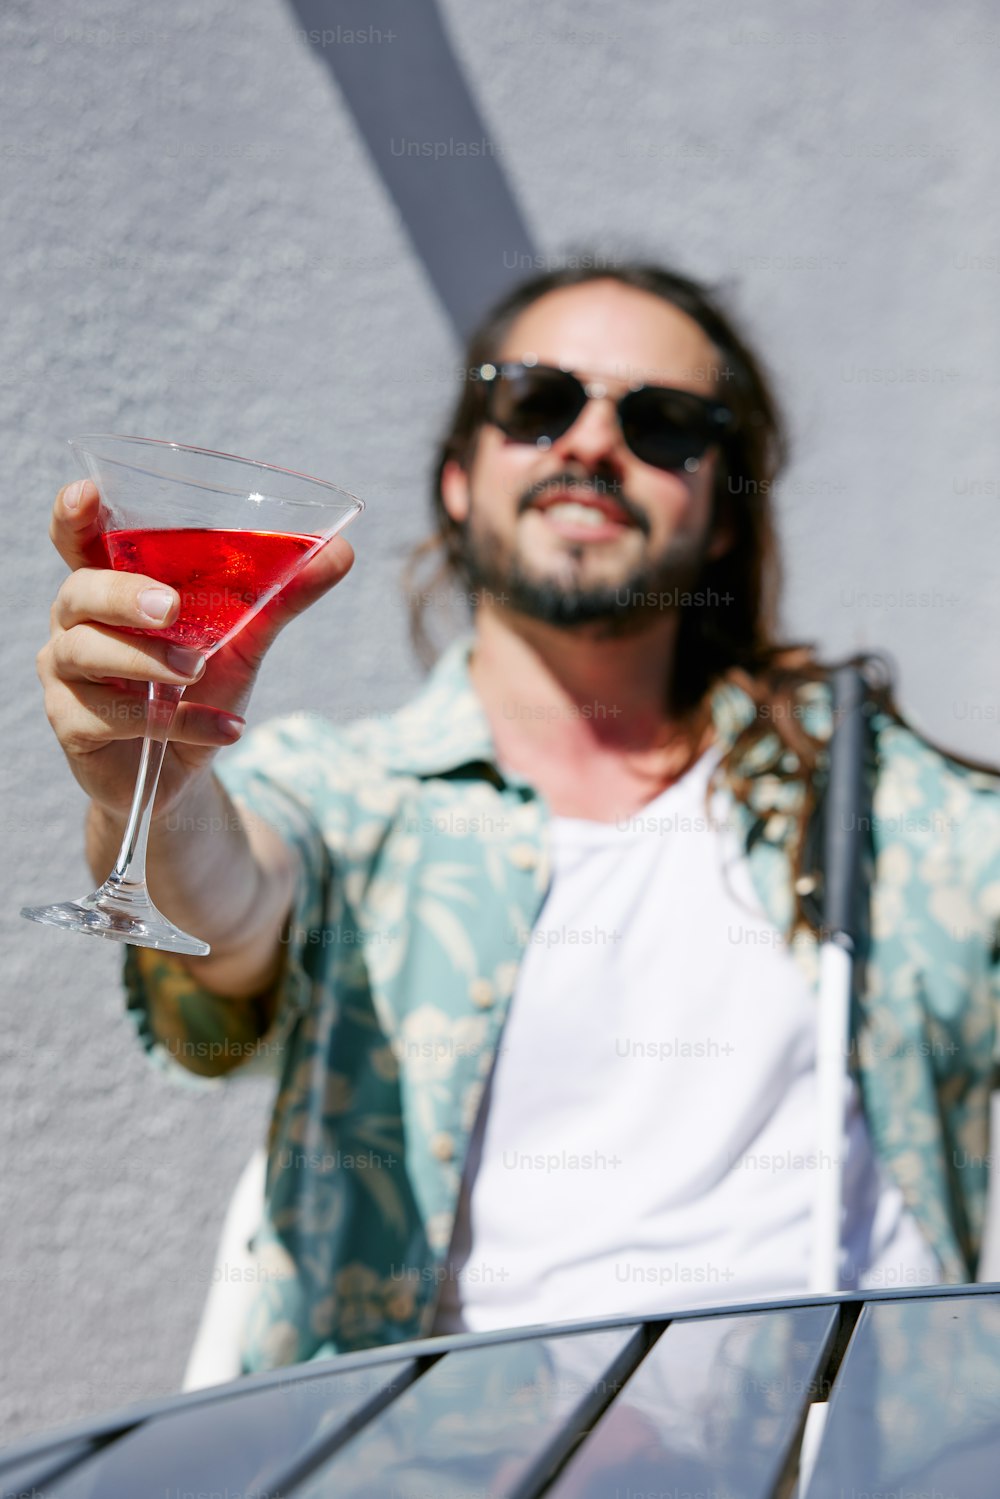 a man holding a wine glass with a red liquid in it